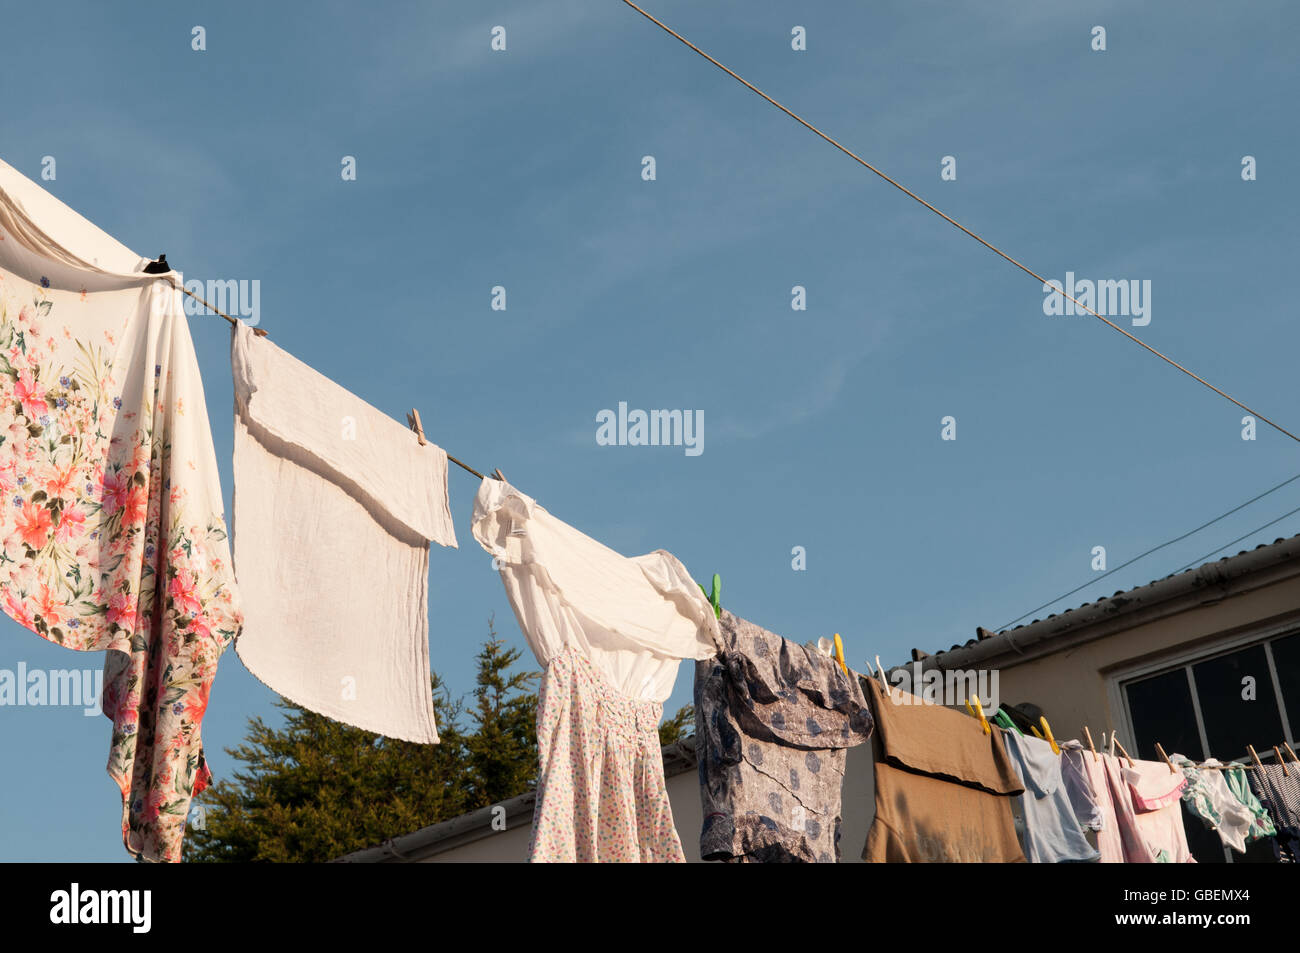 Clothes hanging out to dry on the washing line Stock Photo